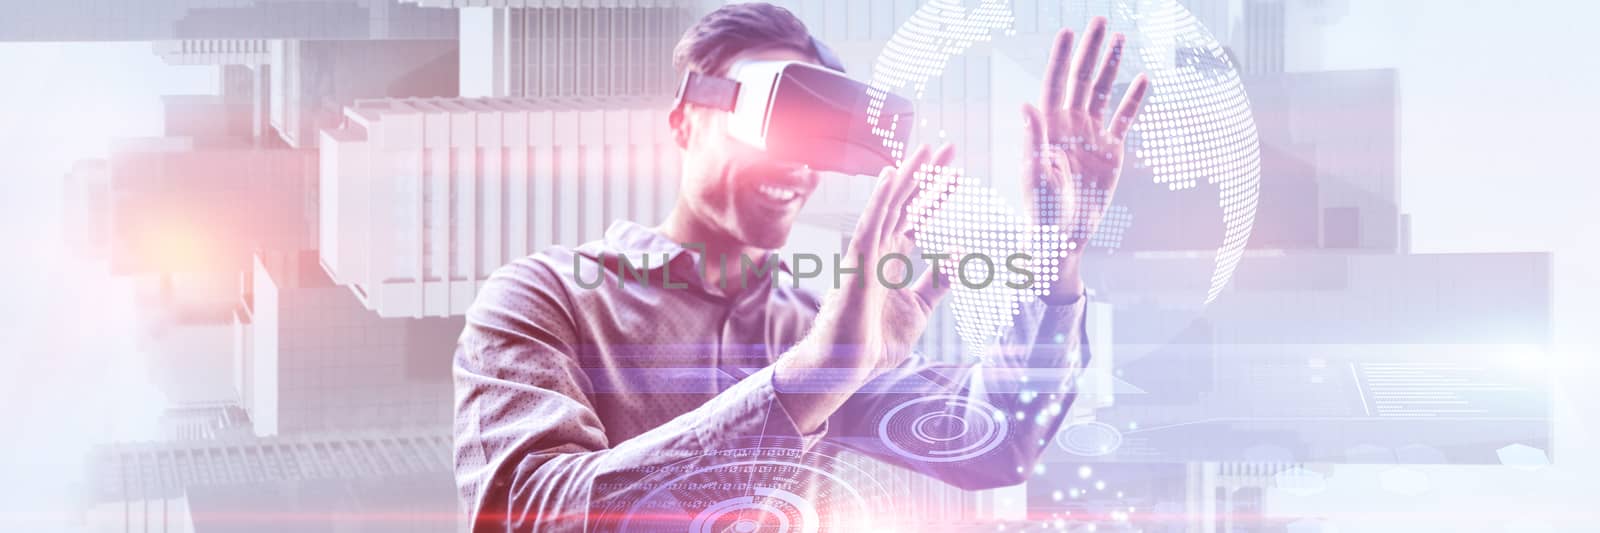 Composite image of man using a virtual reality device by Wavebreakmedia